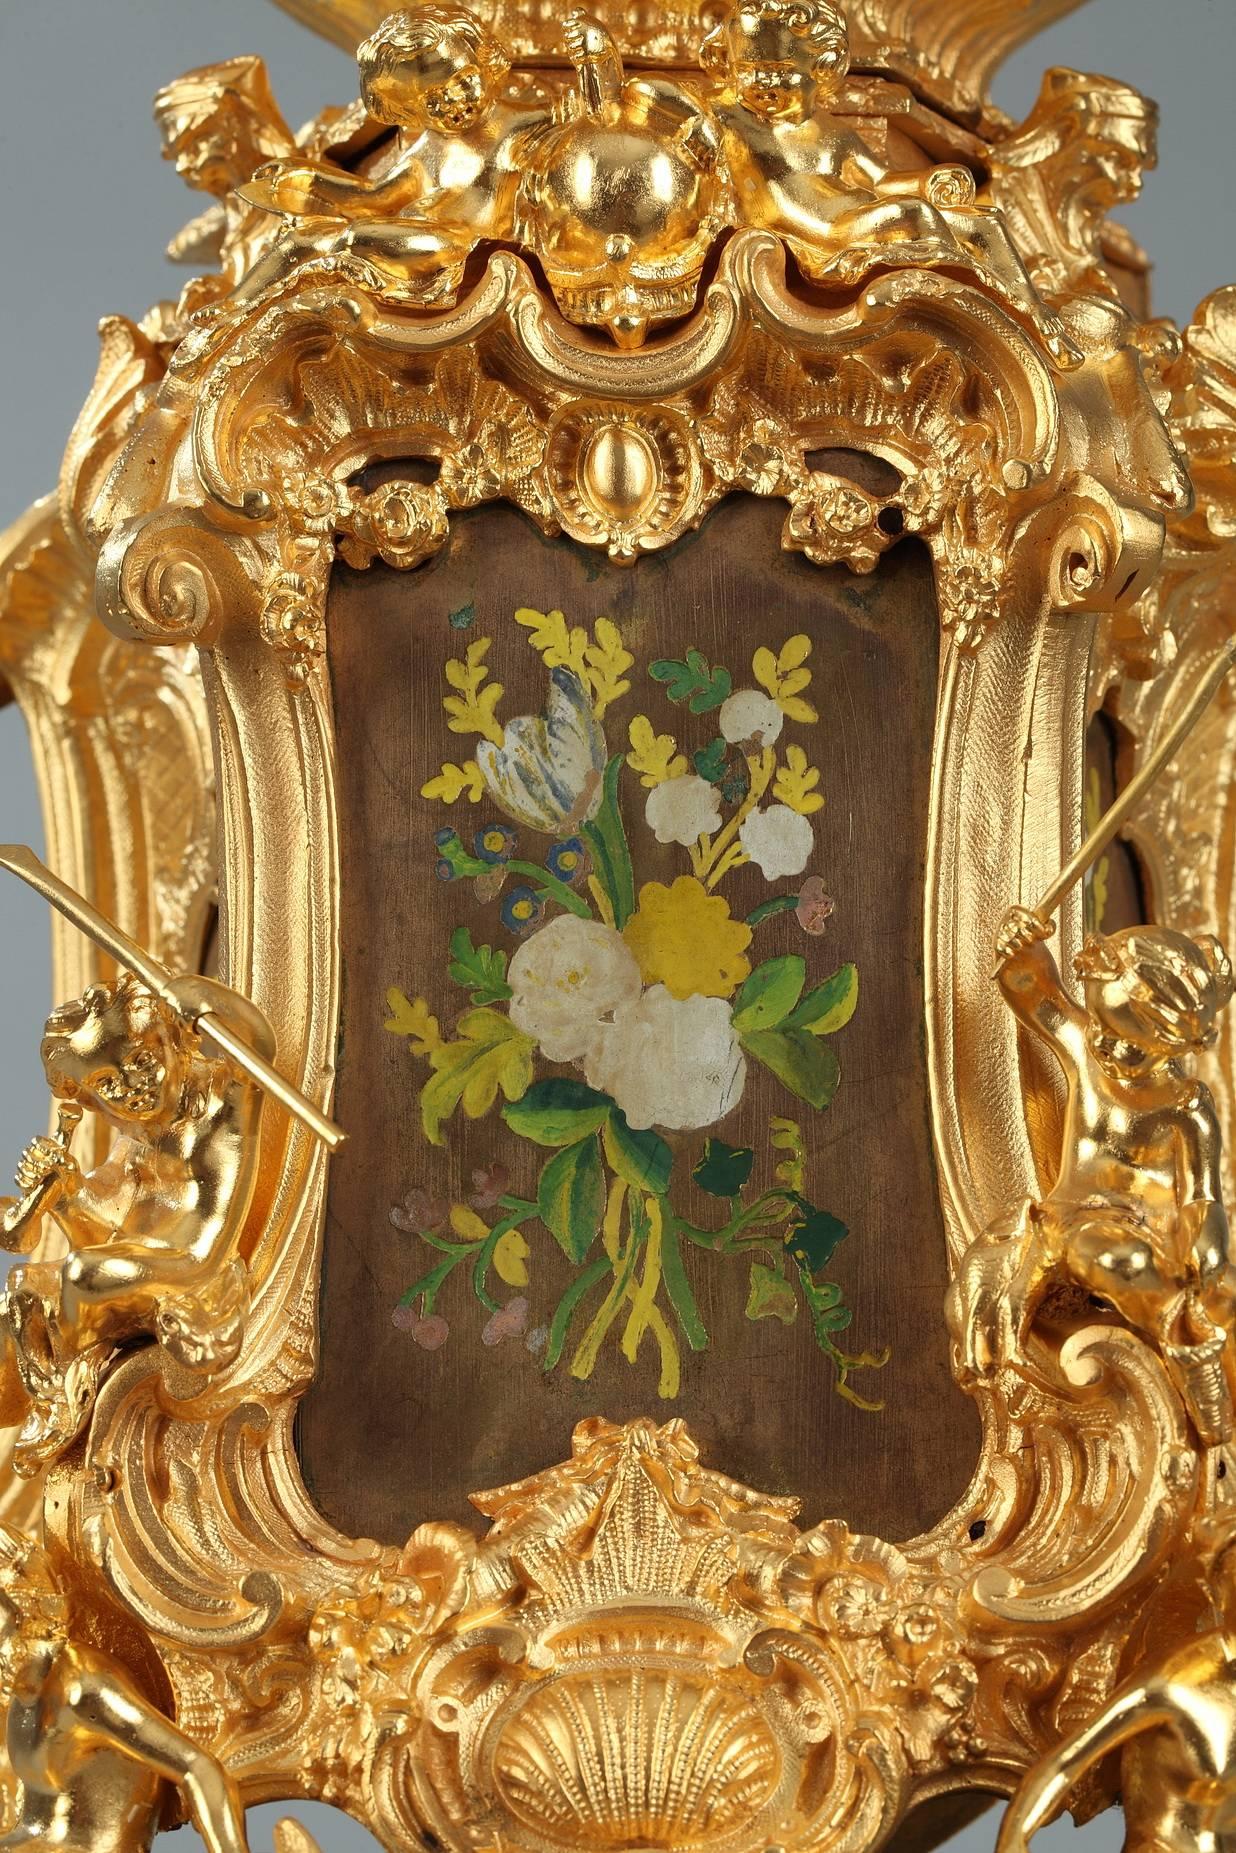 Late 19th Century Rocaille Ormolu Mantel Clock with Floral Decoration For Sale 2